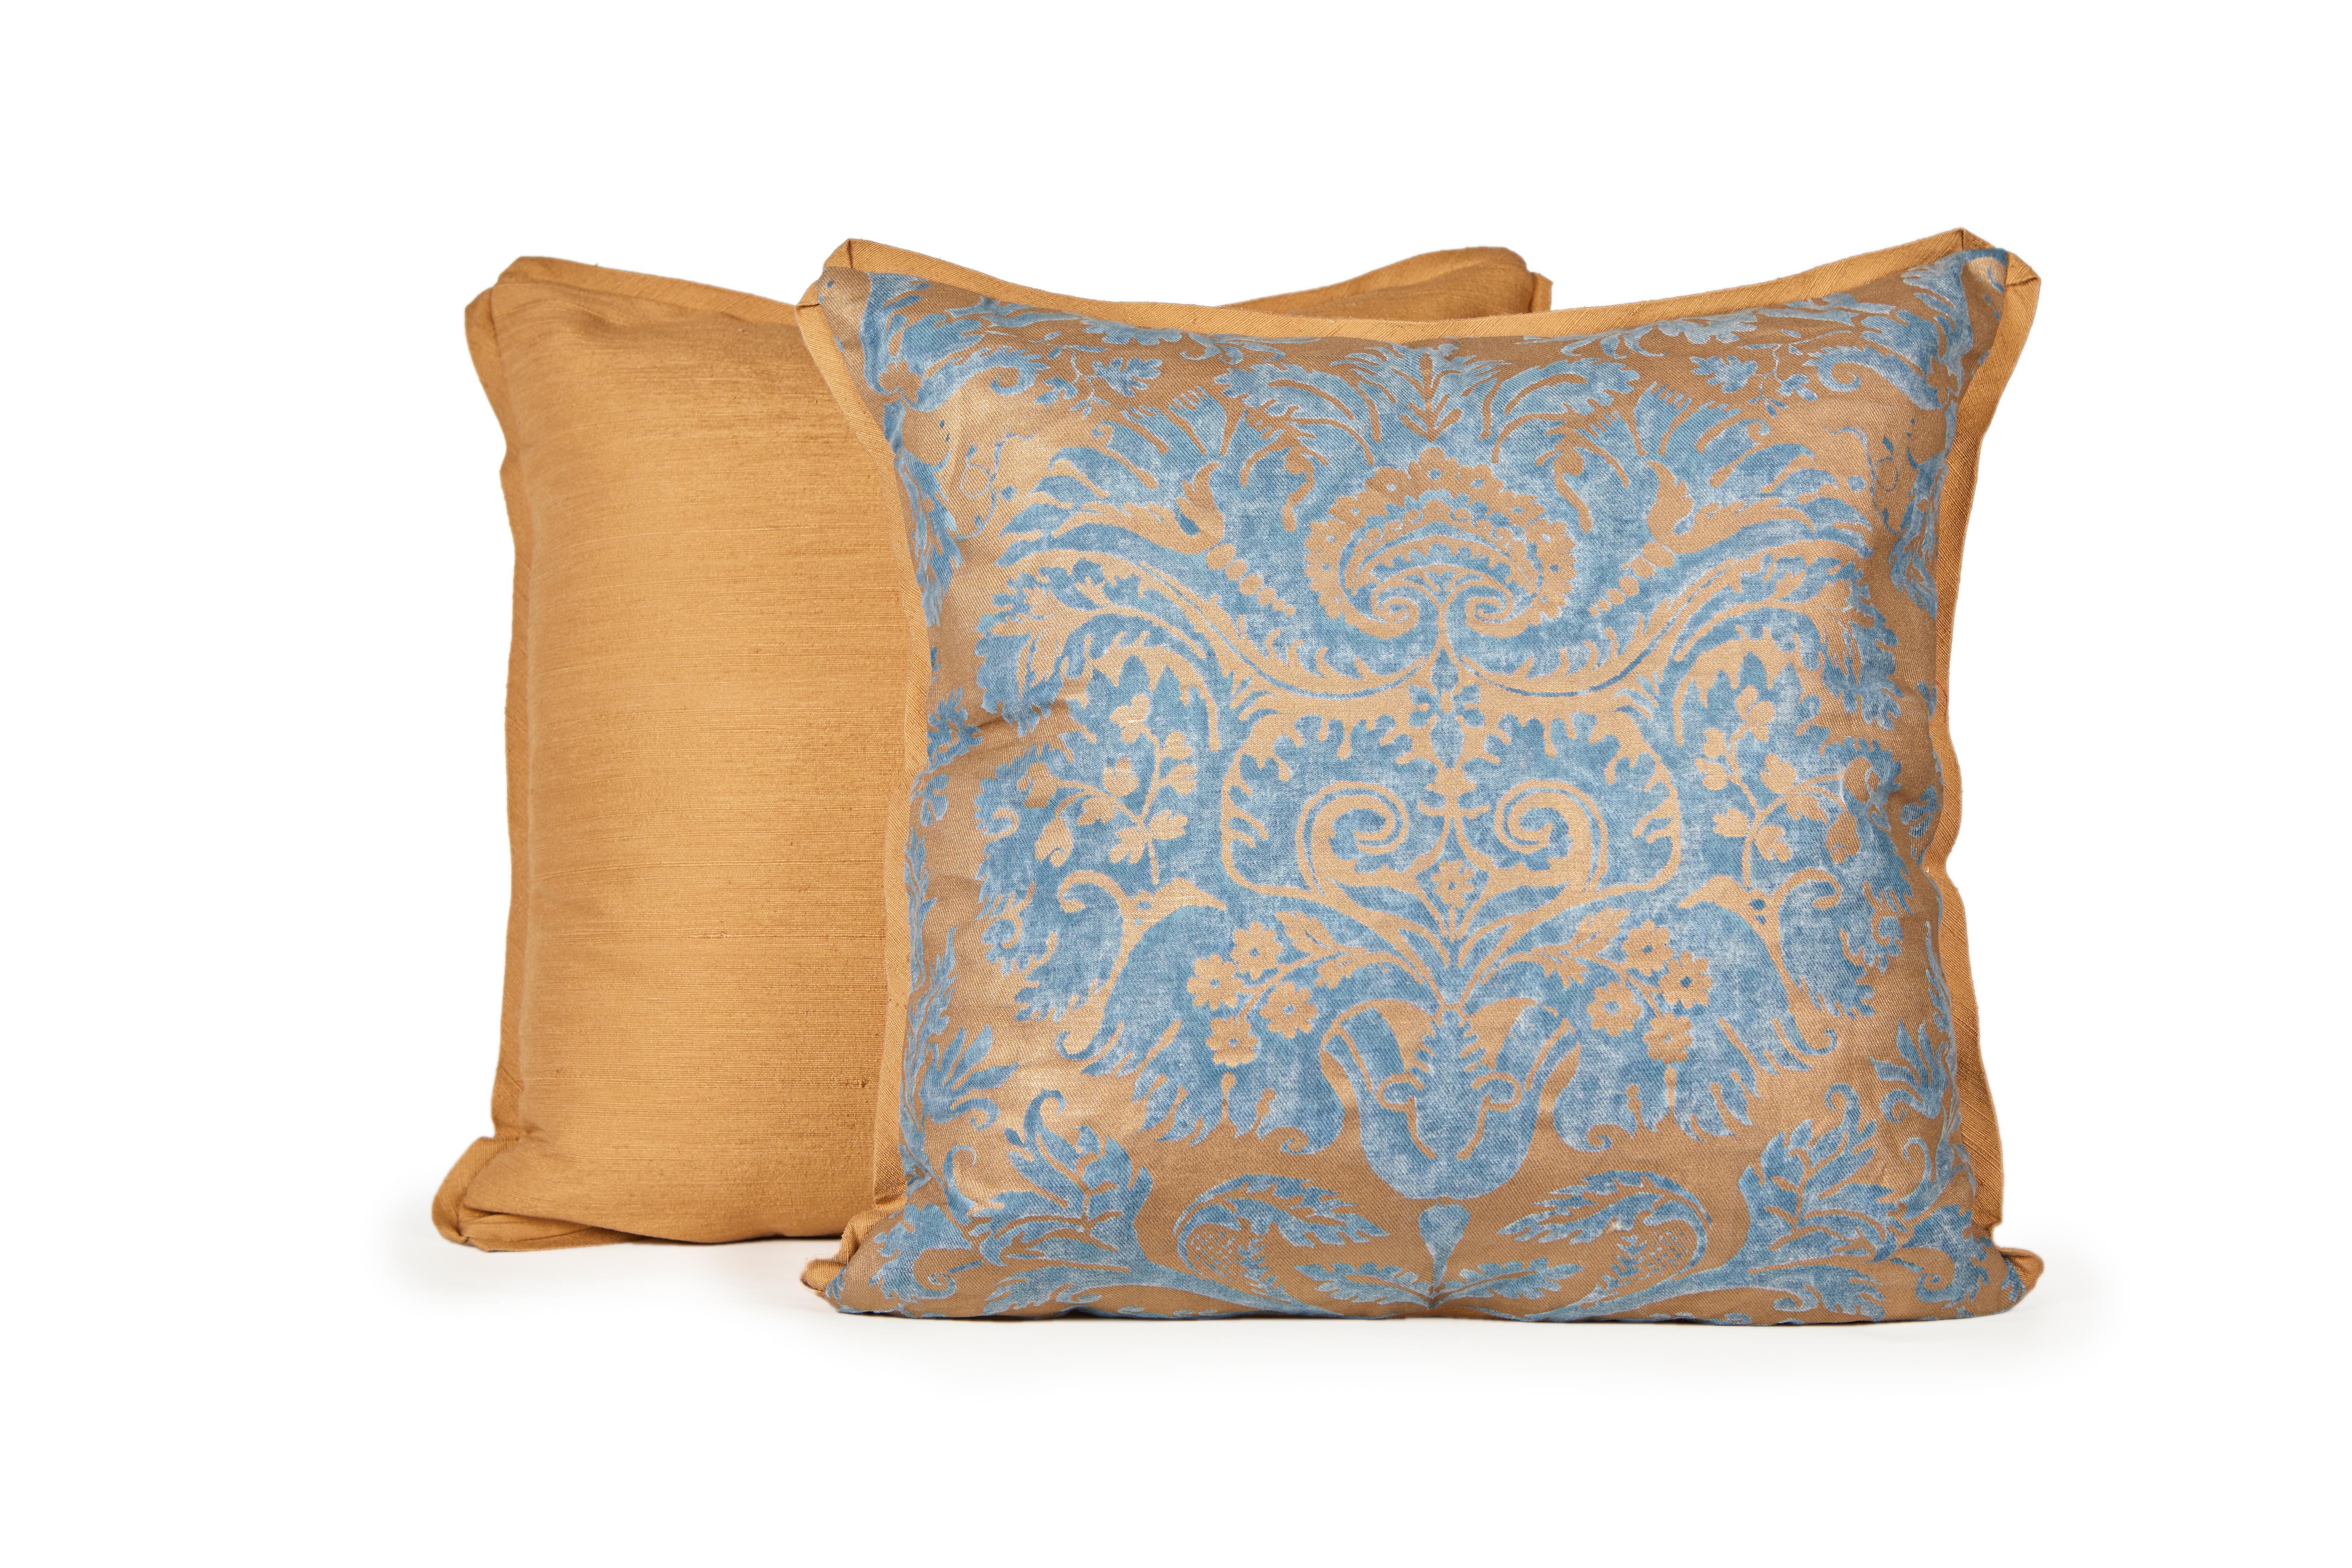 A pair of Fortuny fabric cushions in the Demedici pattern, silvery gold and blue colorway, bias silk edge and gold silk blend backing, the pattern, a 17th century Italian design named for the famous Florentine banking family, political dynasty and